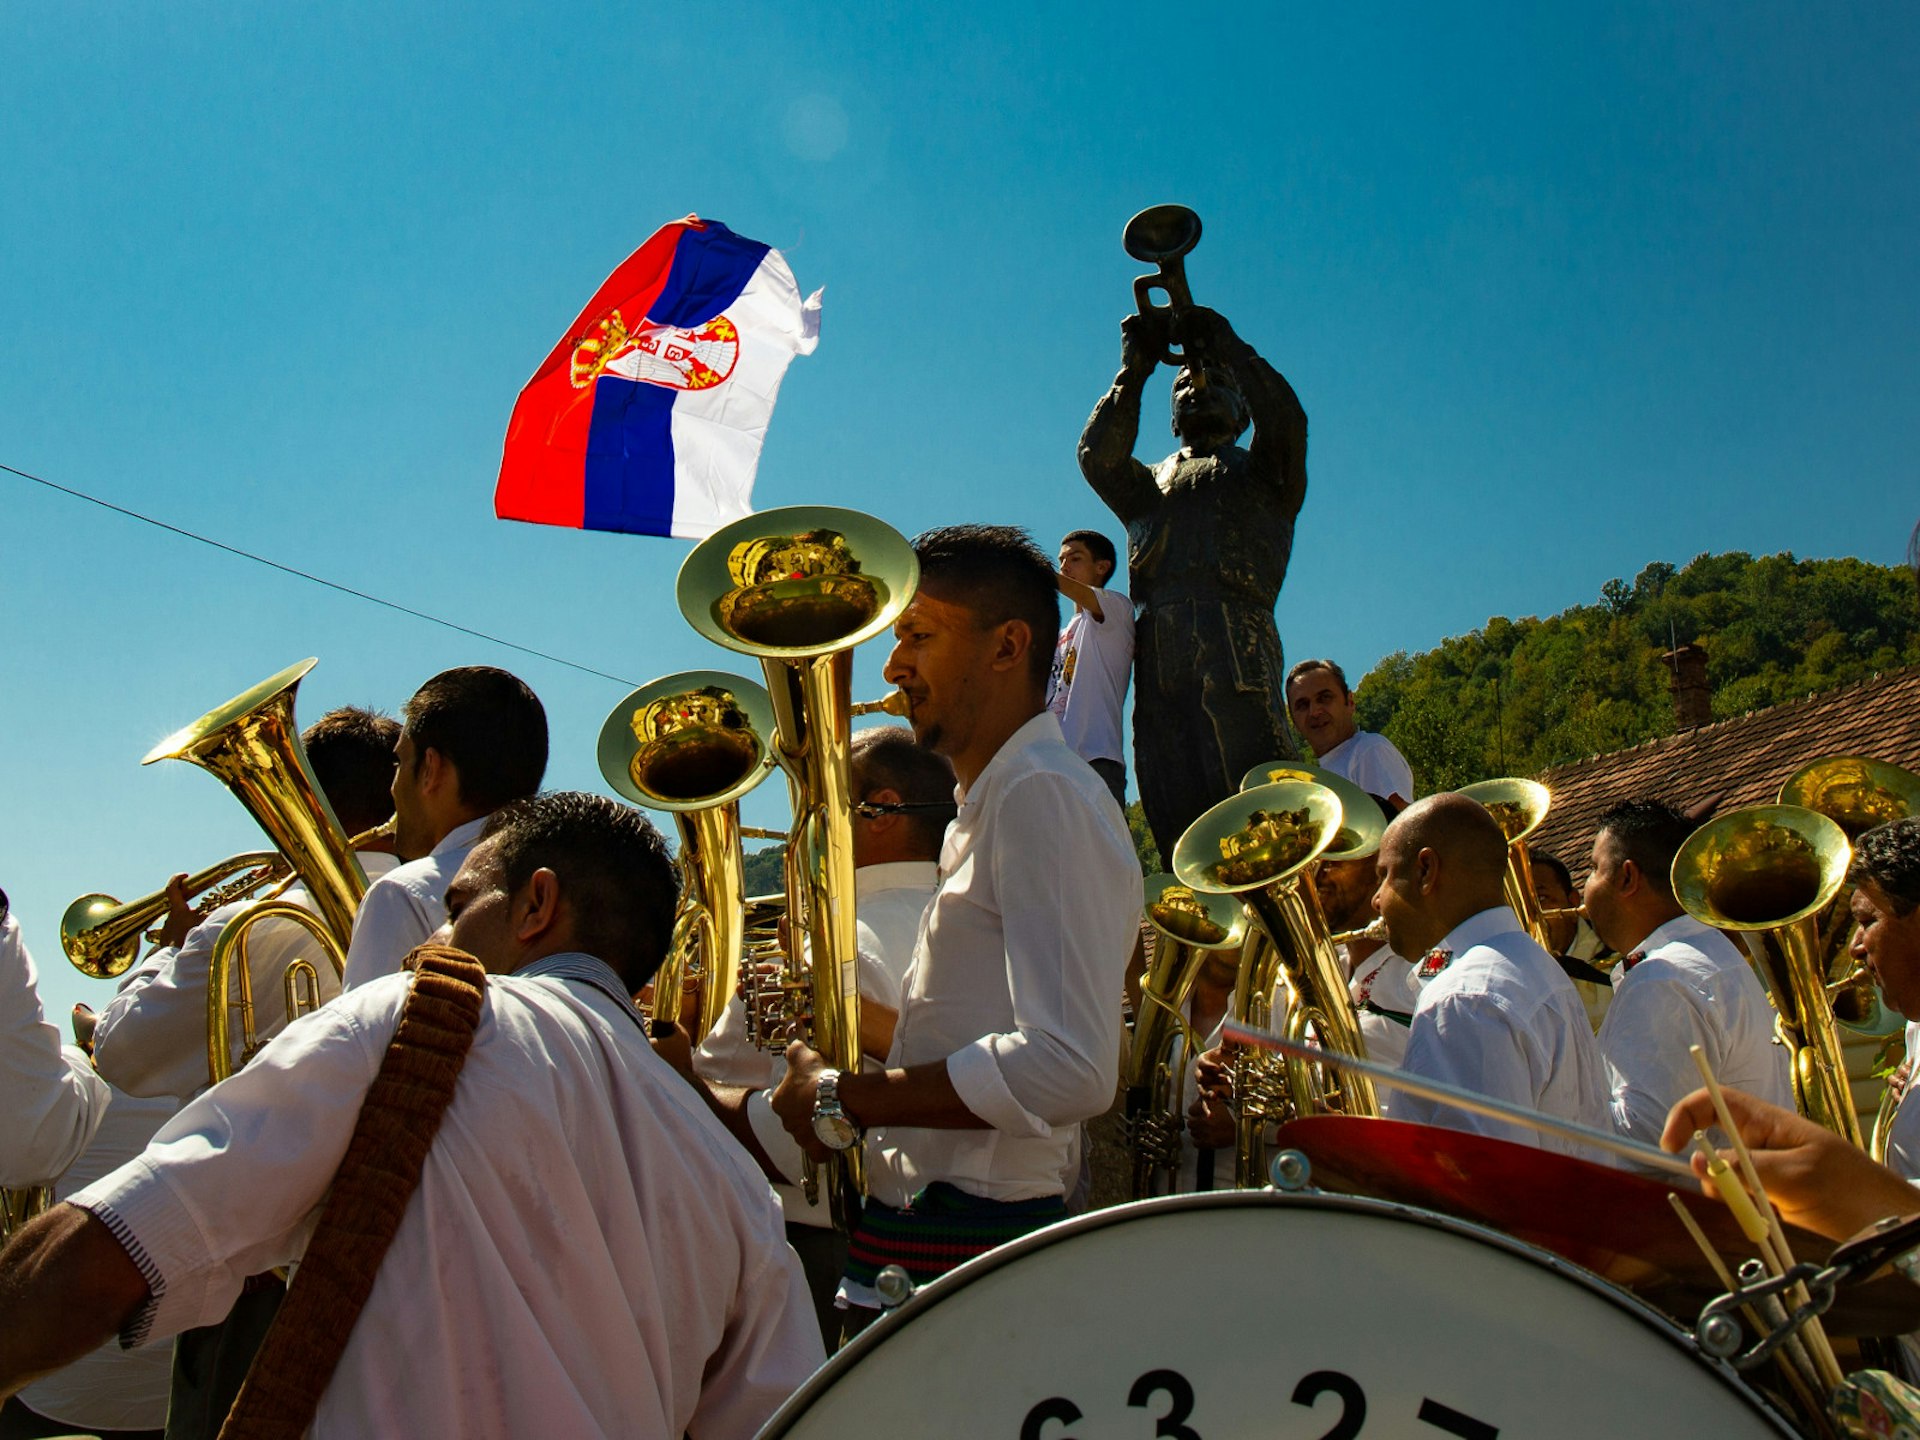 Roma brass bands parade through Guča during the 2017 Trumpet Festival in front of a blue sky as well as a statue of a trumpet player. Children stand at the base of the statue waving the Serbian flag © Aleksandar Donev / Lonely Planet